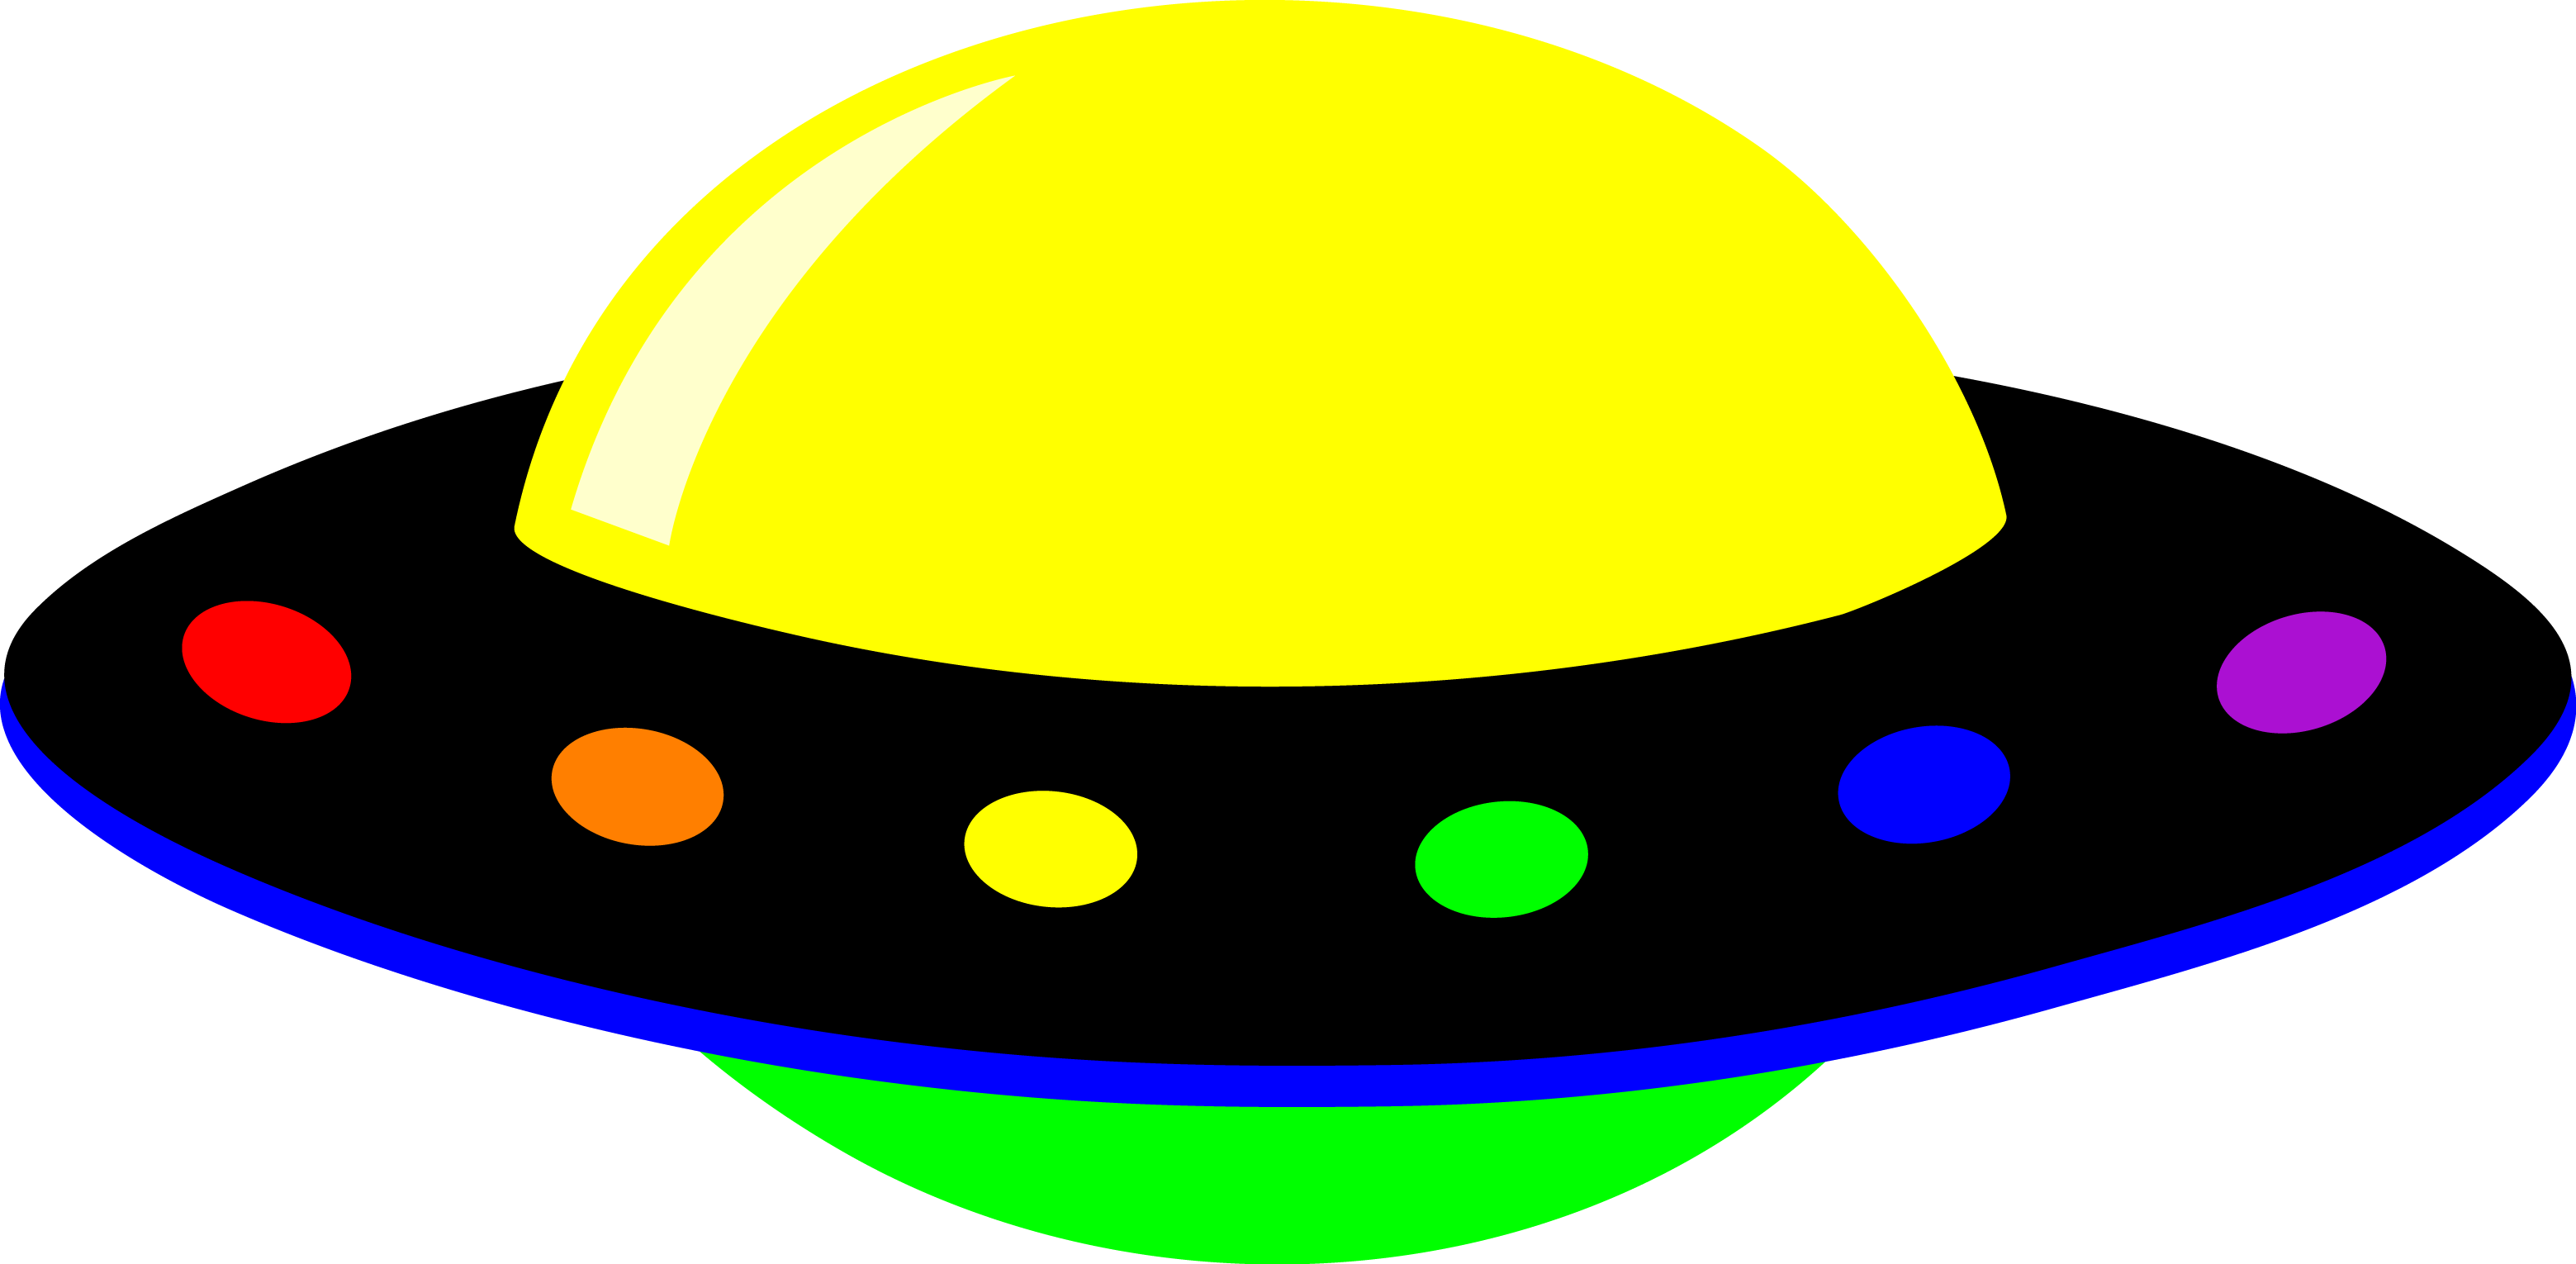 Images For > Clipart Alien Spaceship